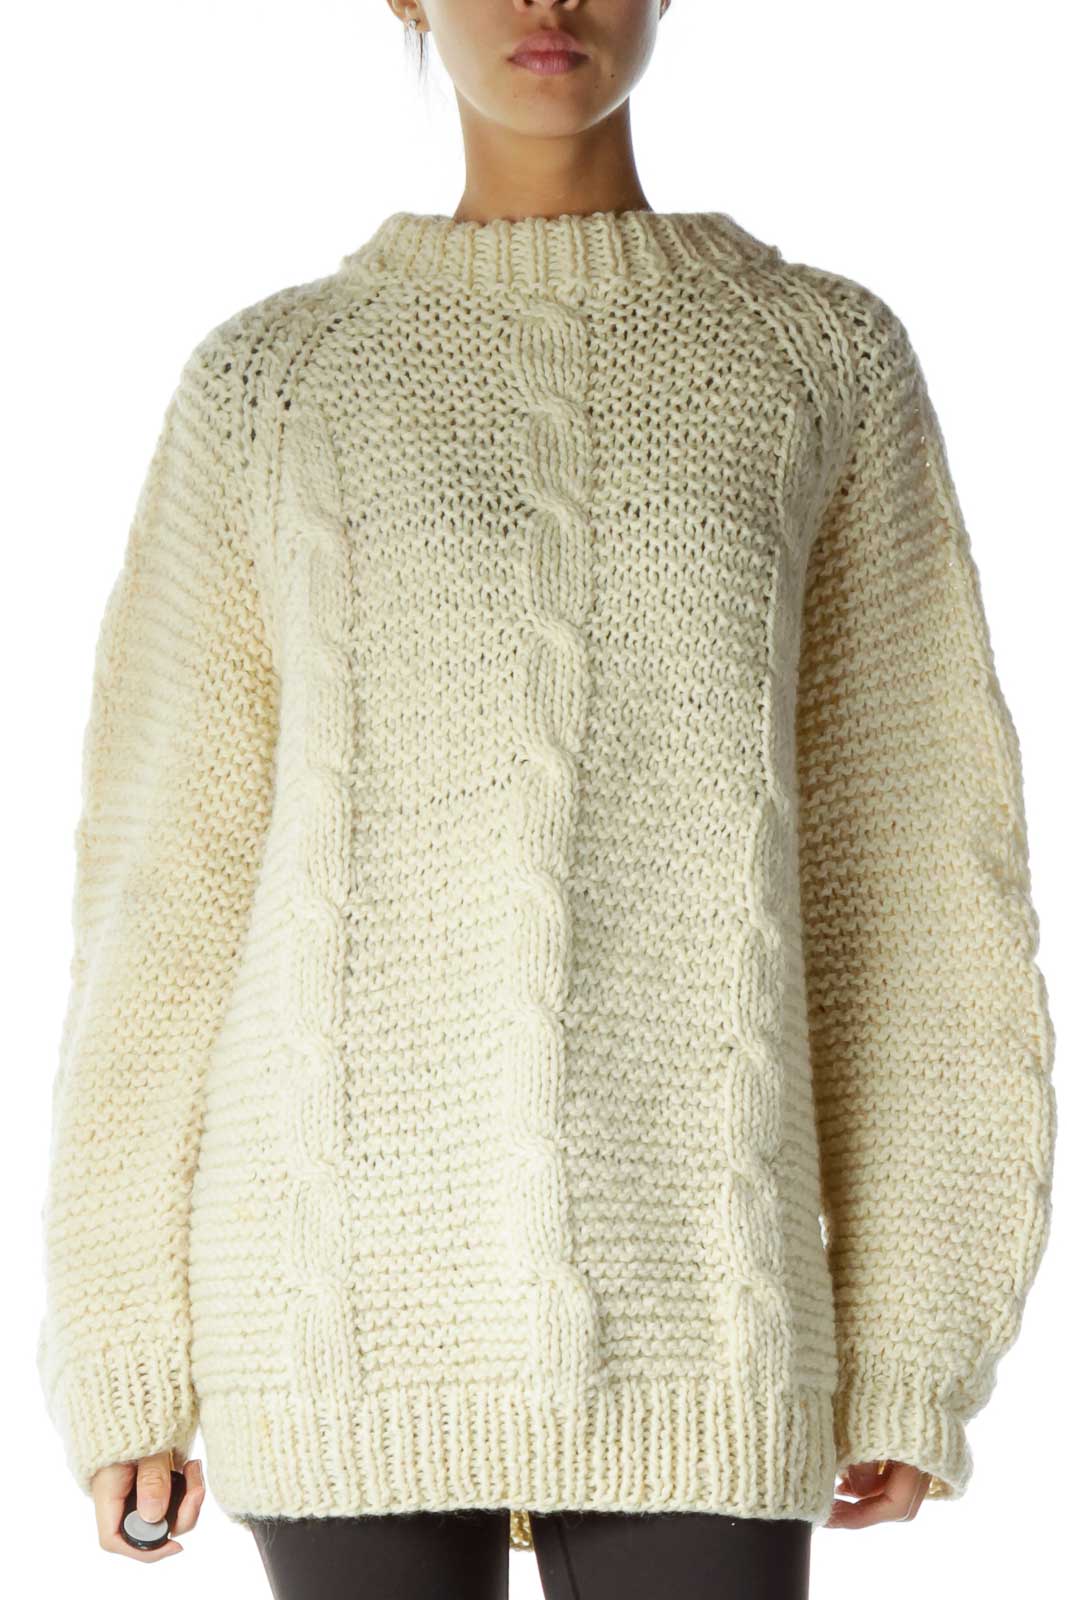 Cream Cable Knit Chunky Sweater Front